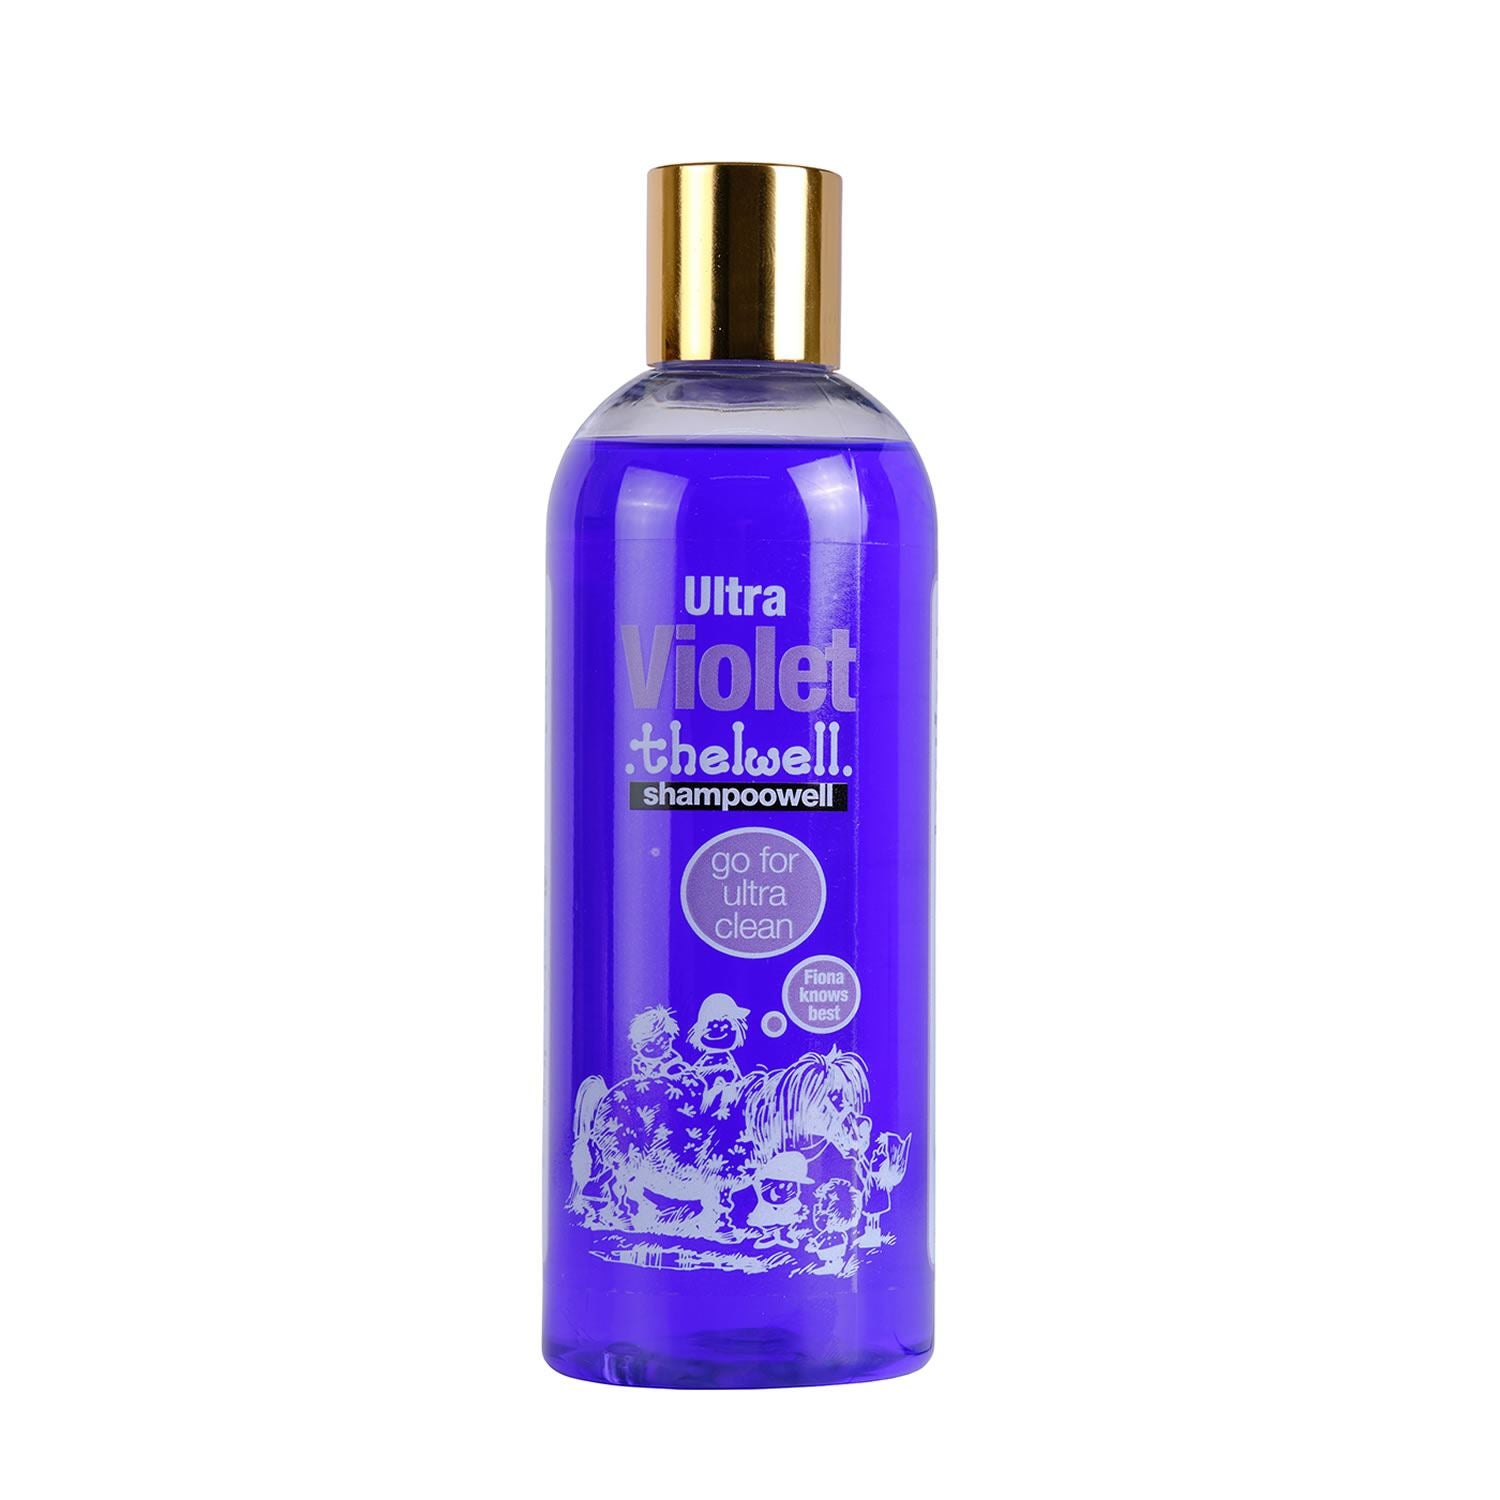 Naf Thelwell Ultra Violet Shampoo - Just Horse Riders